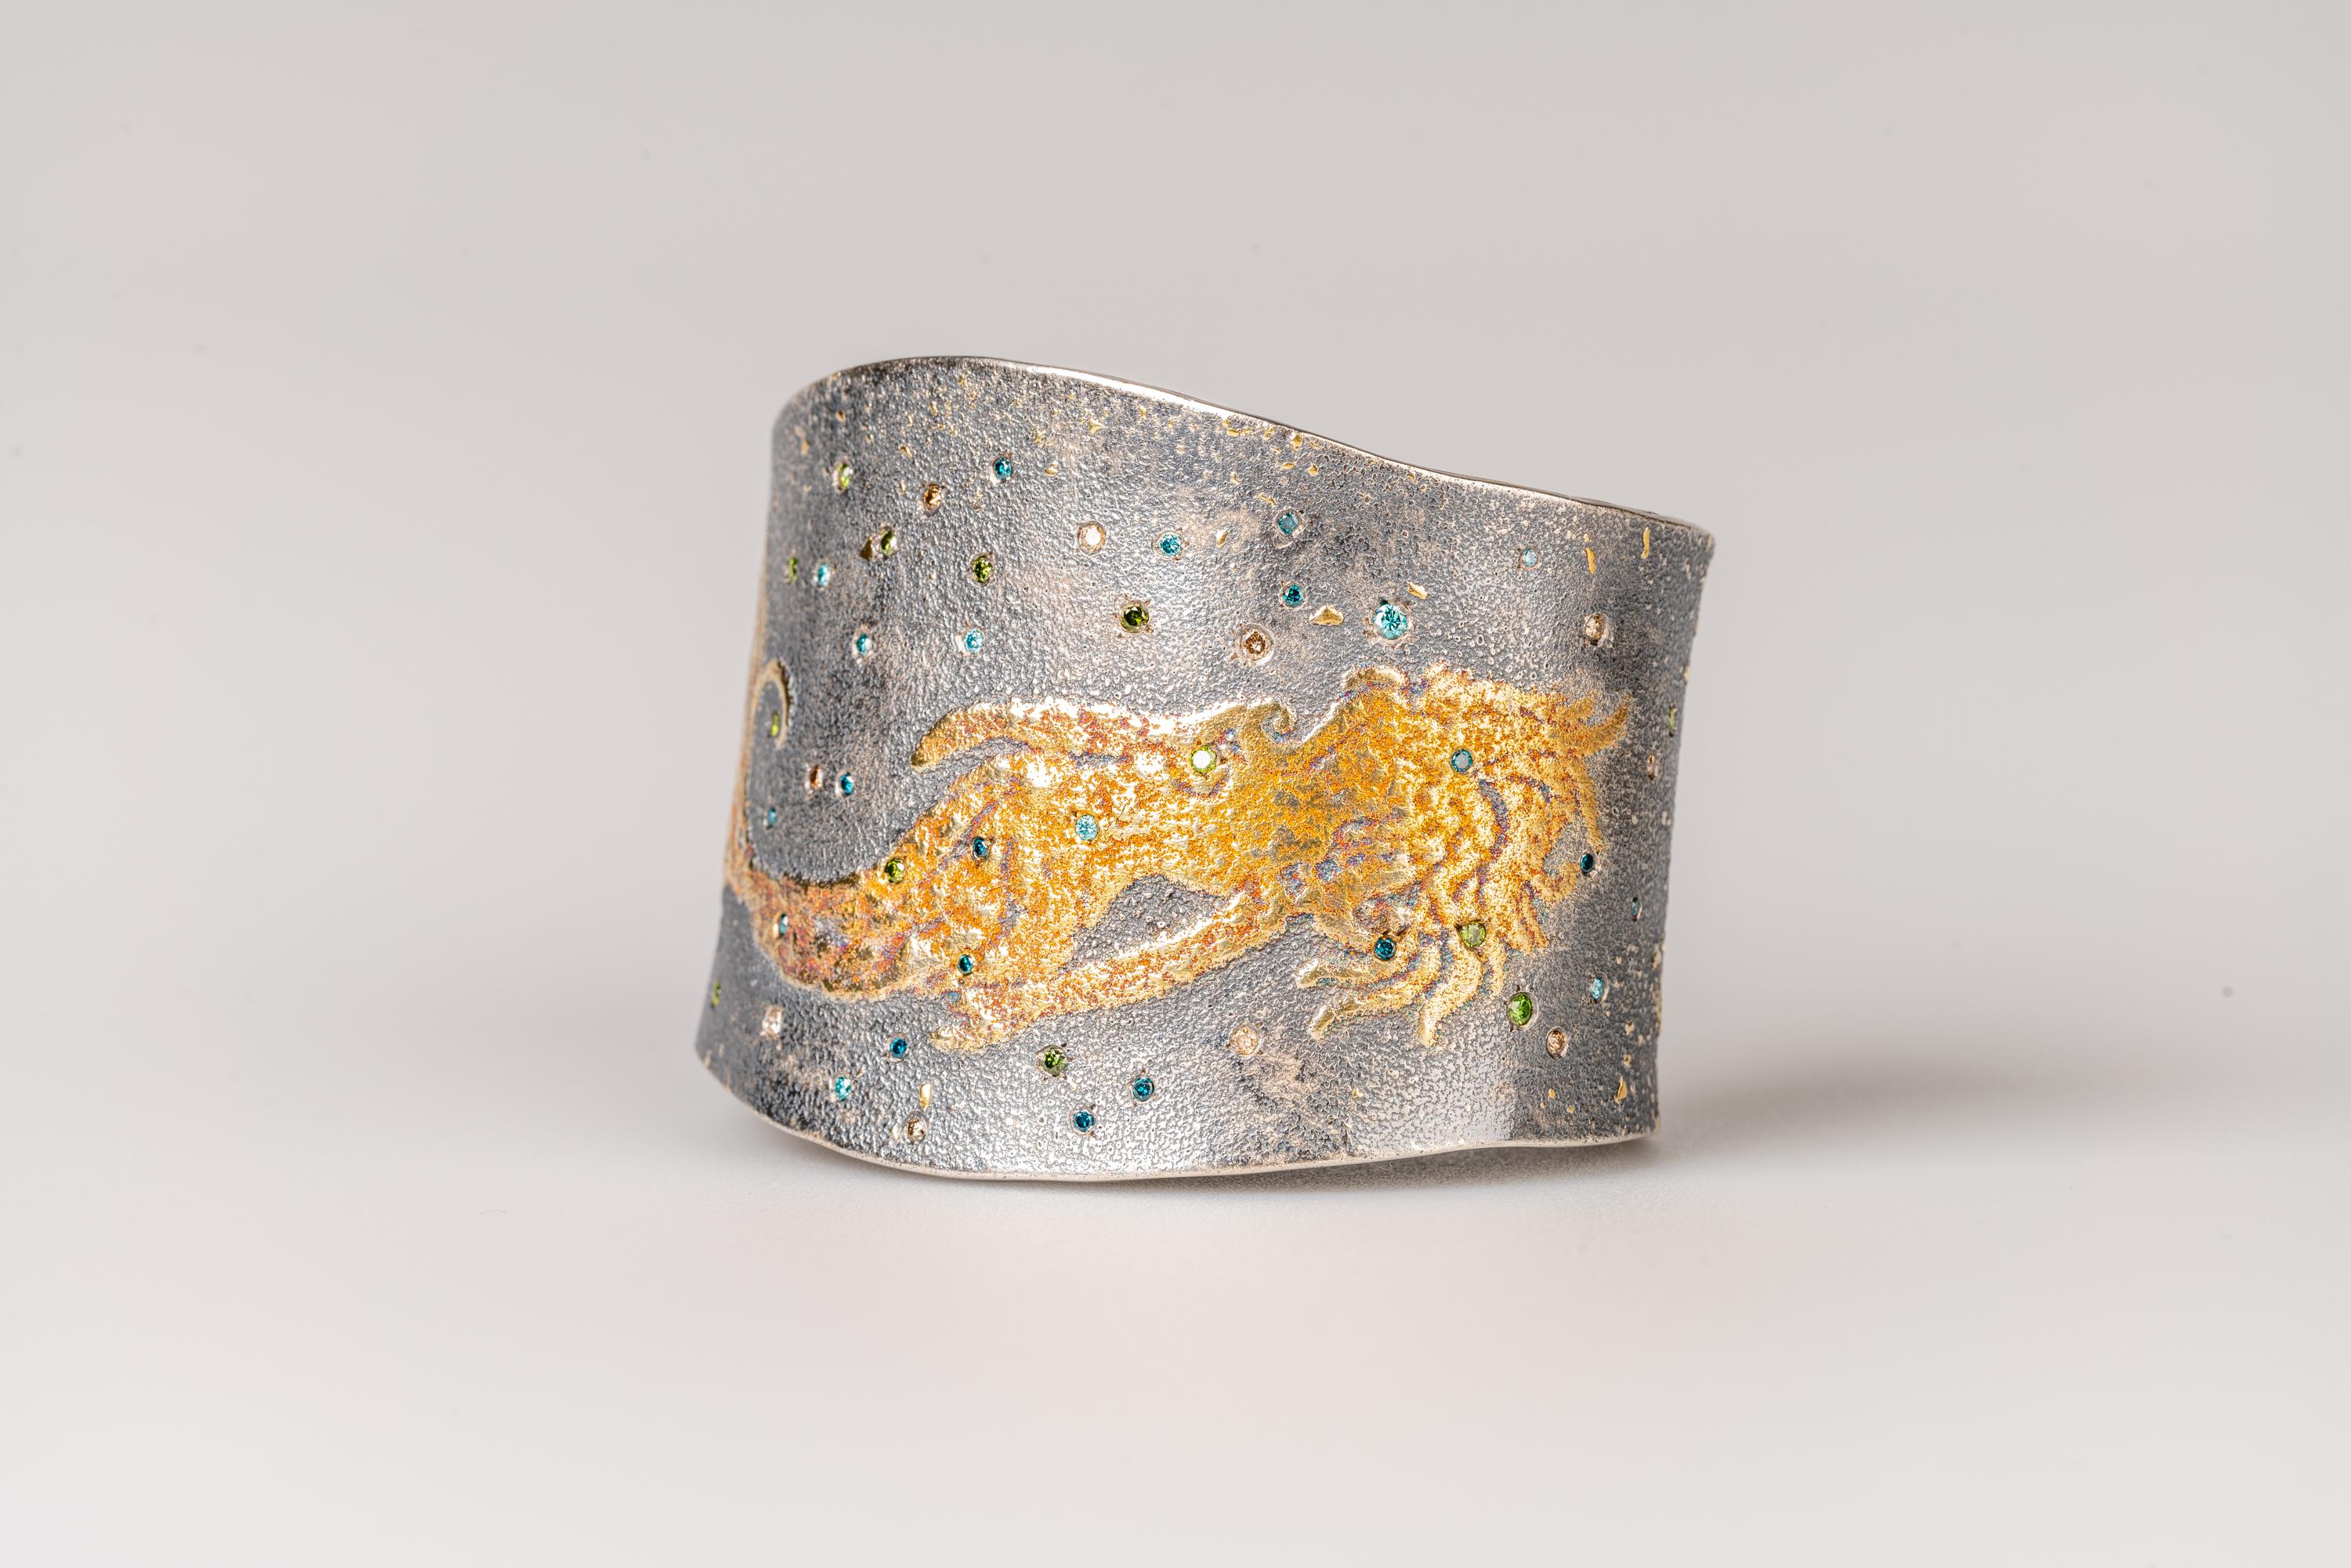 An oxidized sterling silver cuff with 24k gold mermaid design, 24k gold fairy dust, and 1.02total carat weight aqua blue, teal blue. green, and champagne flush-set diamonds, measures 2.20inches x 1.72inches inside. Made and designed by llyn